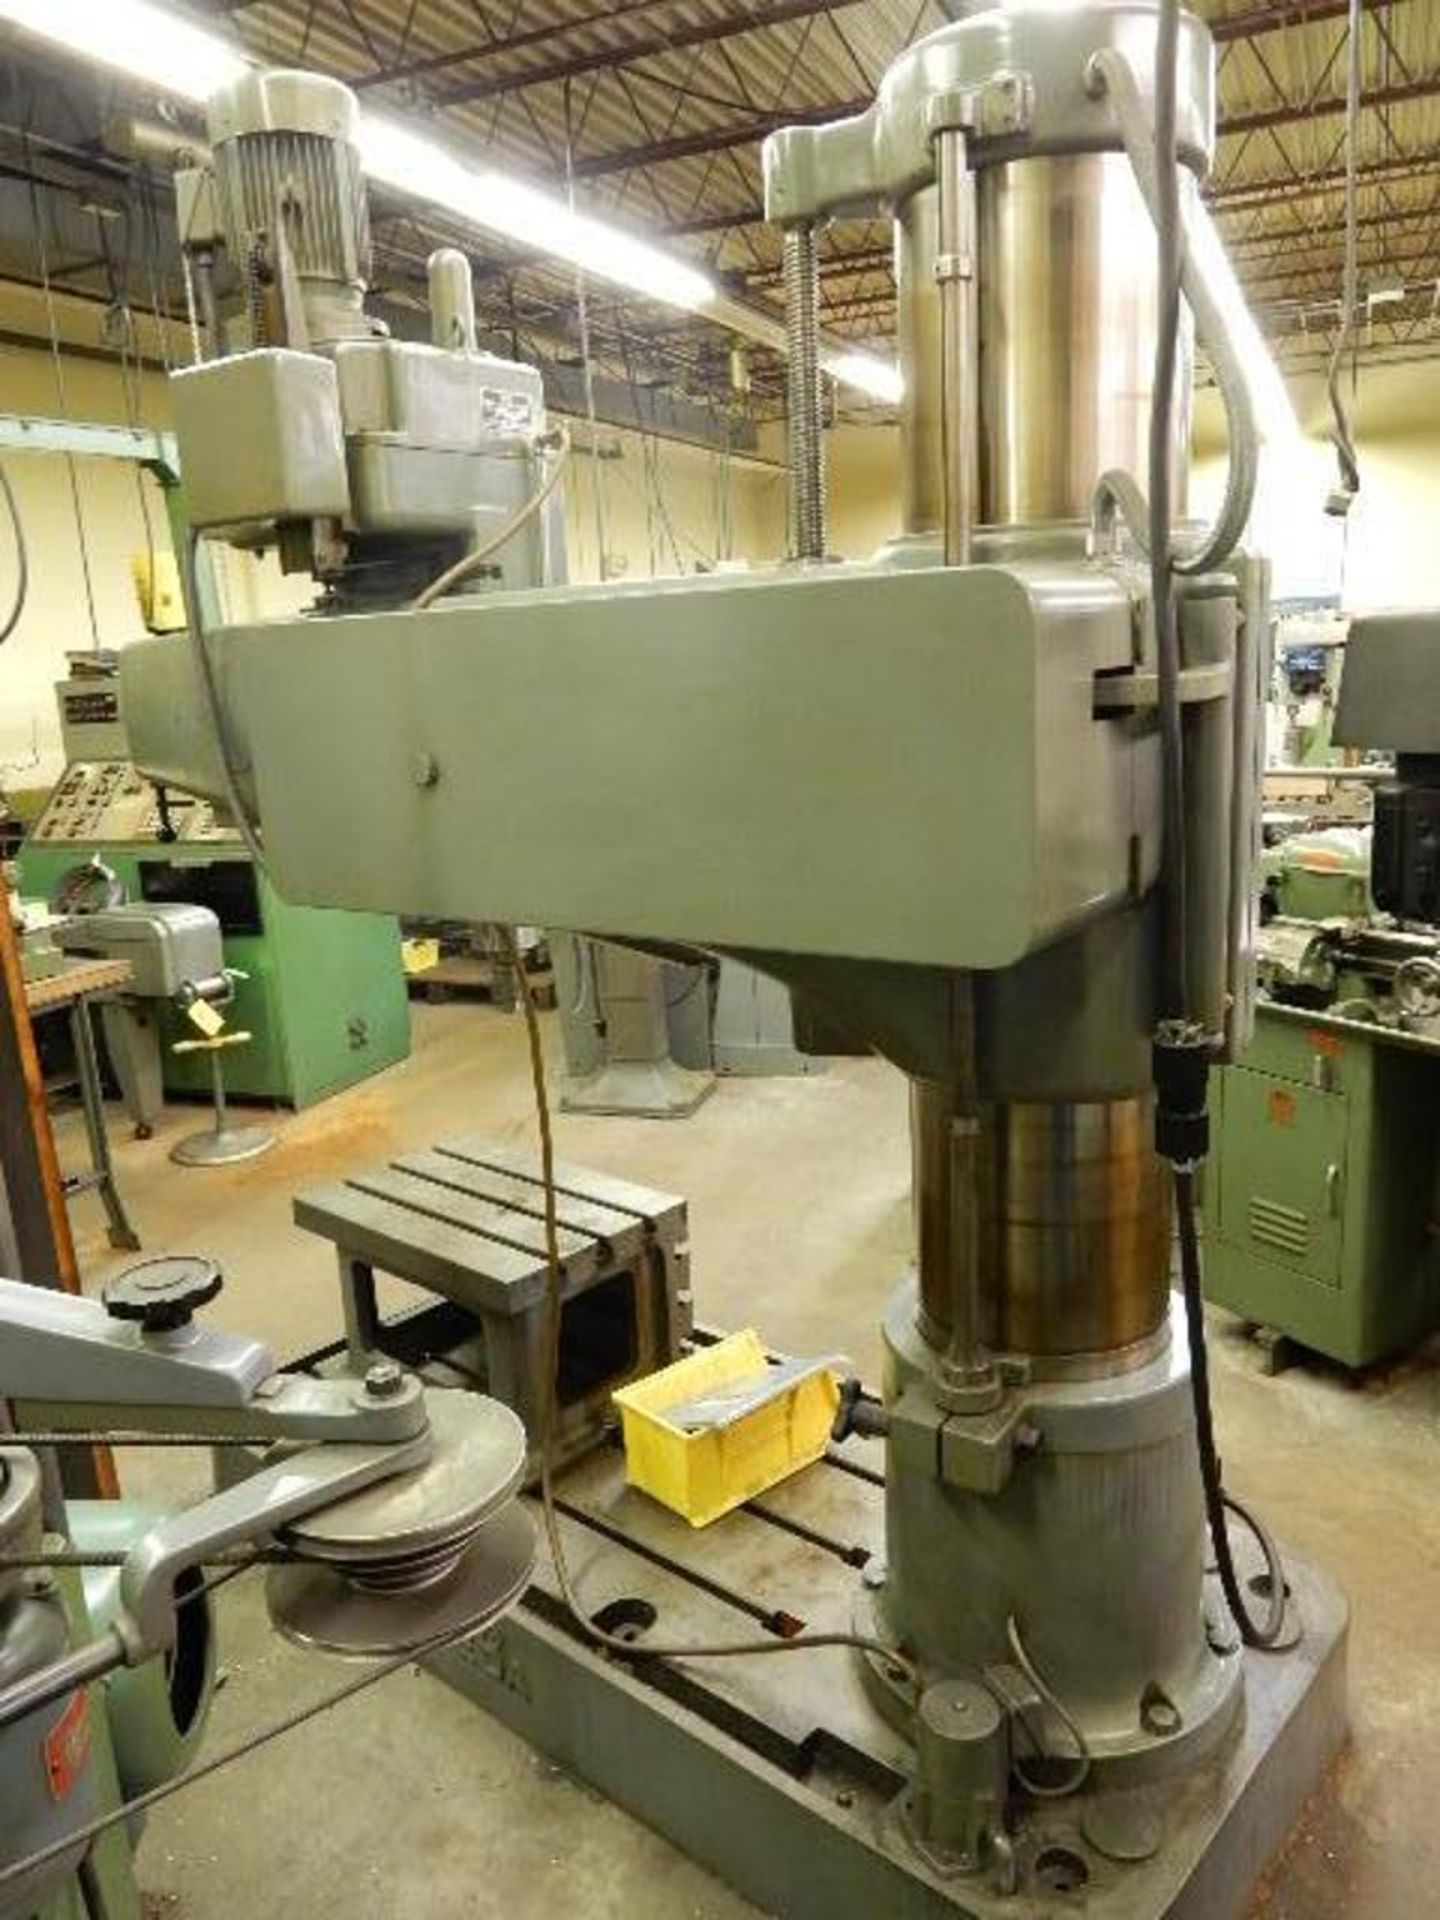 Ikeda Model RM-1375 Radial Arm Drill, 13" Column, 5' Arm, 30-1500 RPM Spindle Speeds, 26.5" - Image 26 of 27